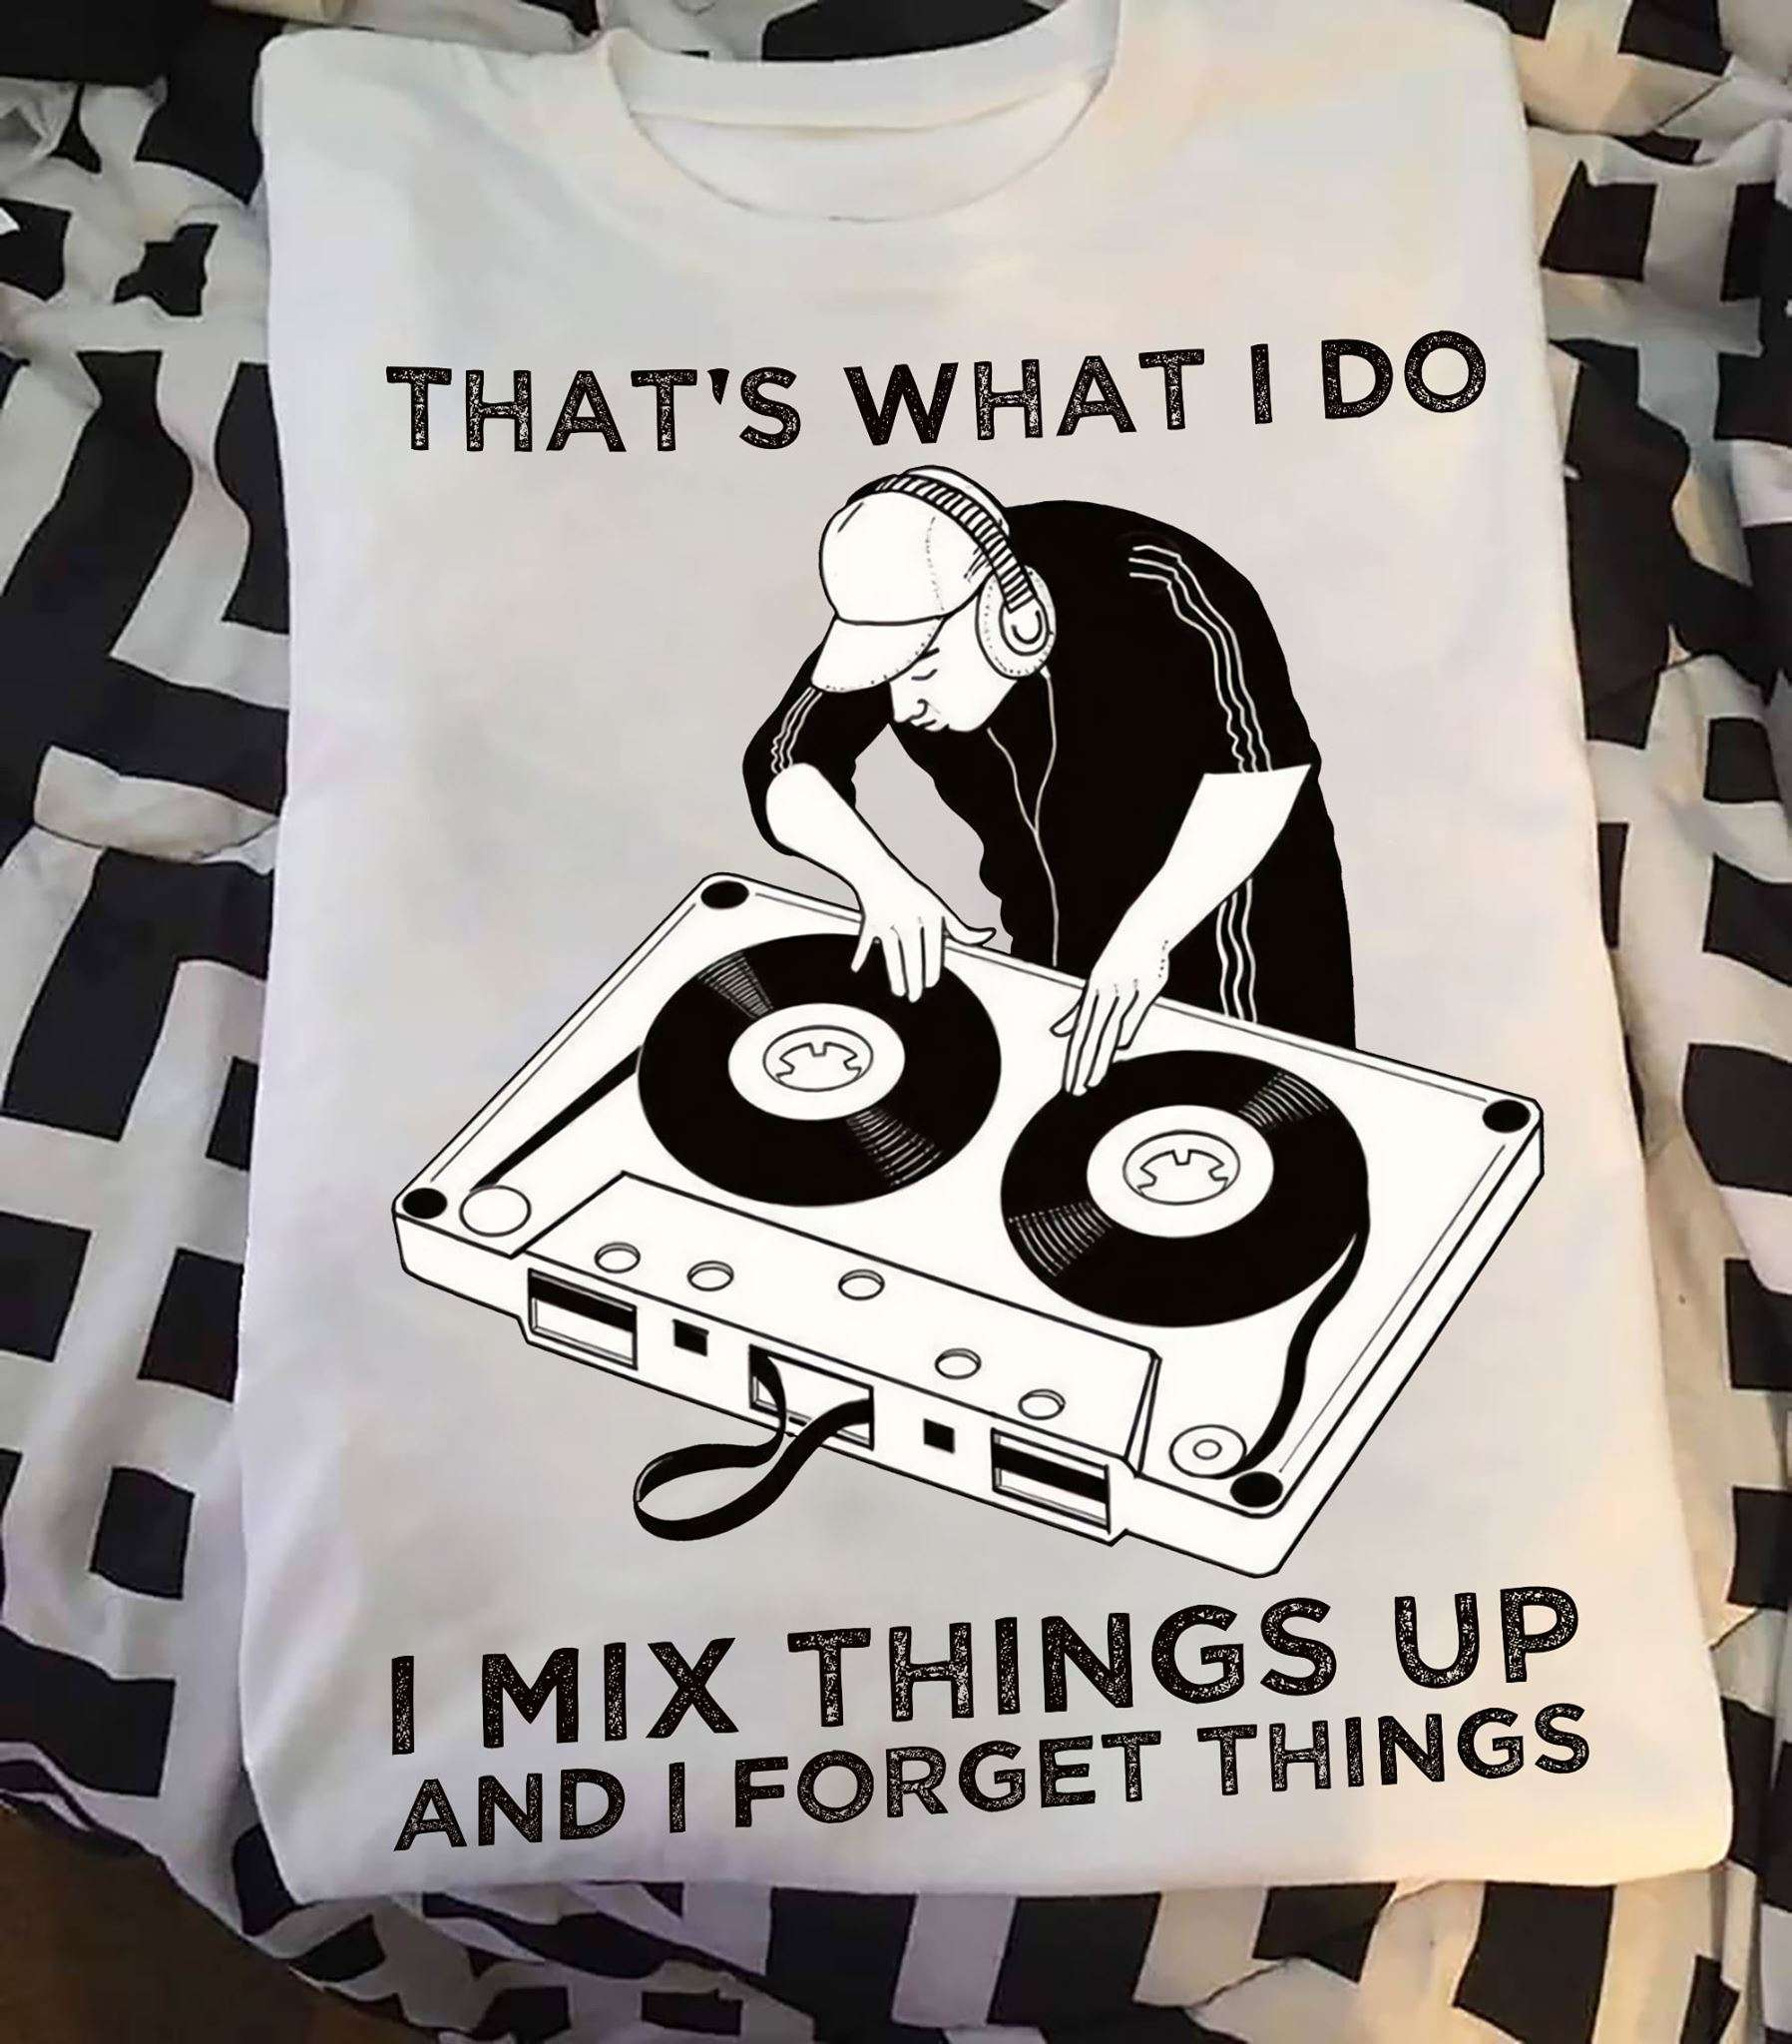 That's what I do I mix things up and I forget things - Love being DJ, DJ mix music